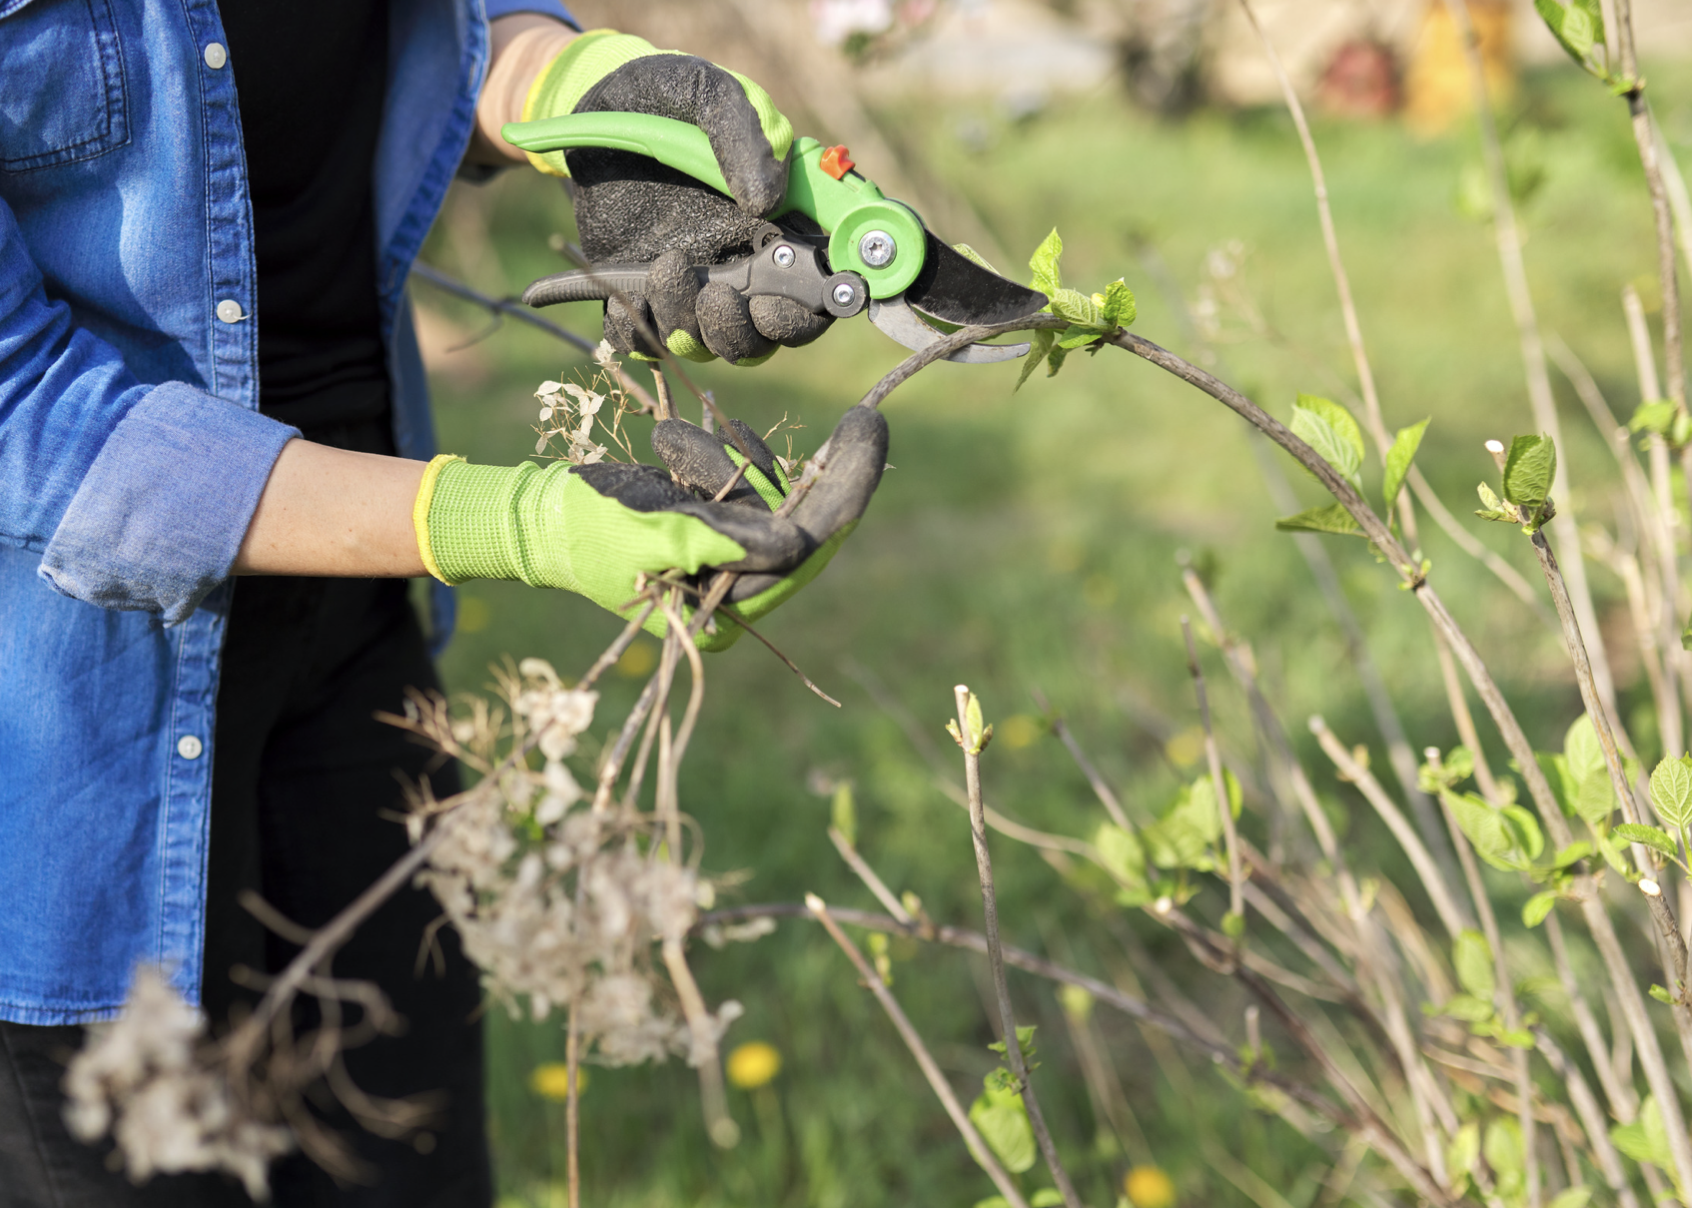 A person uses lopers to prune a hydrangea plant.